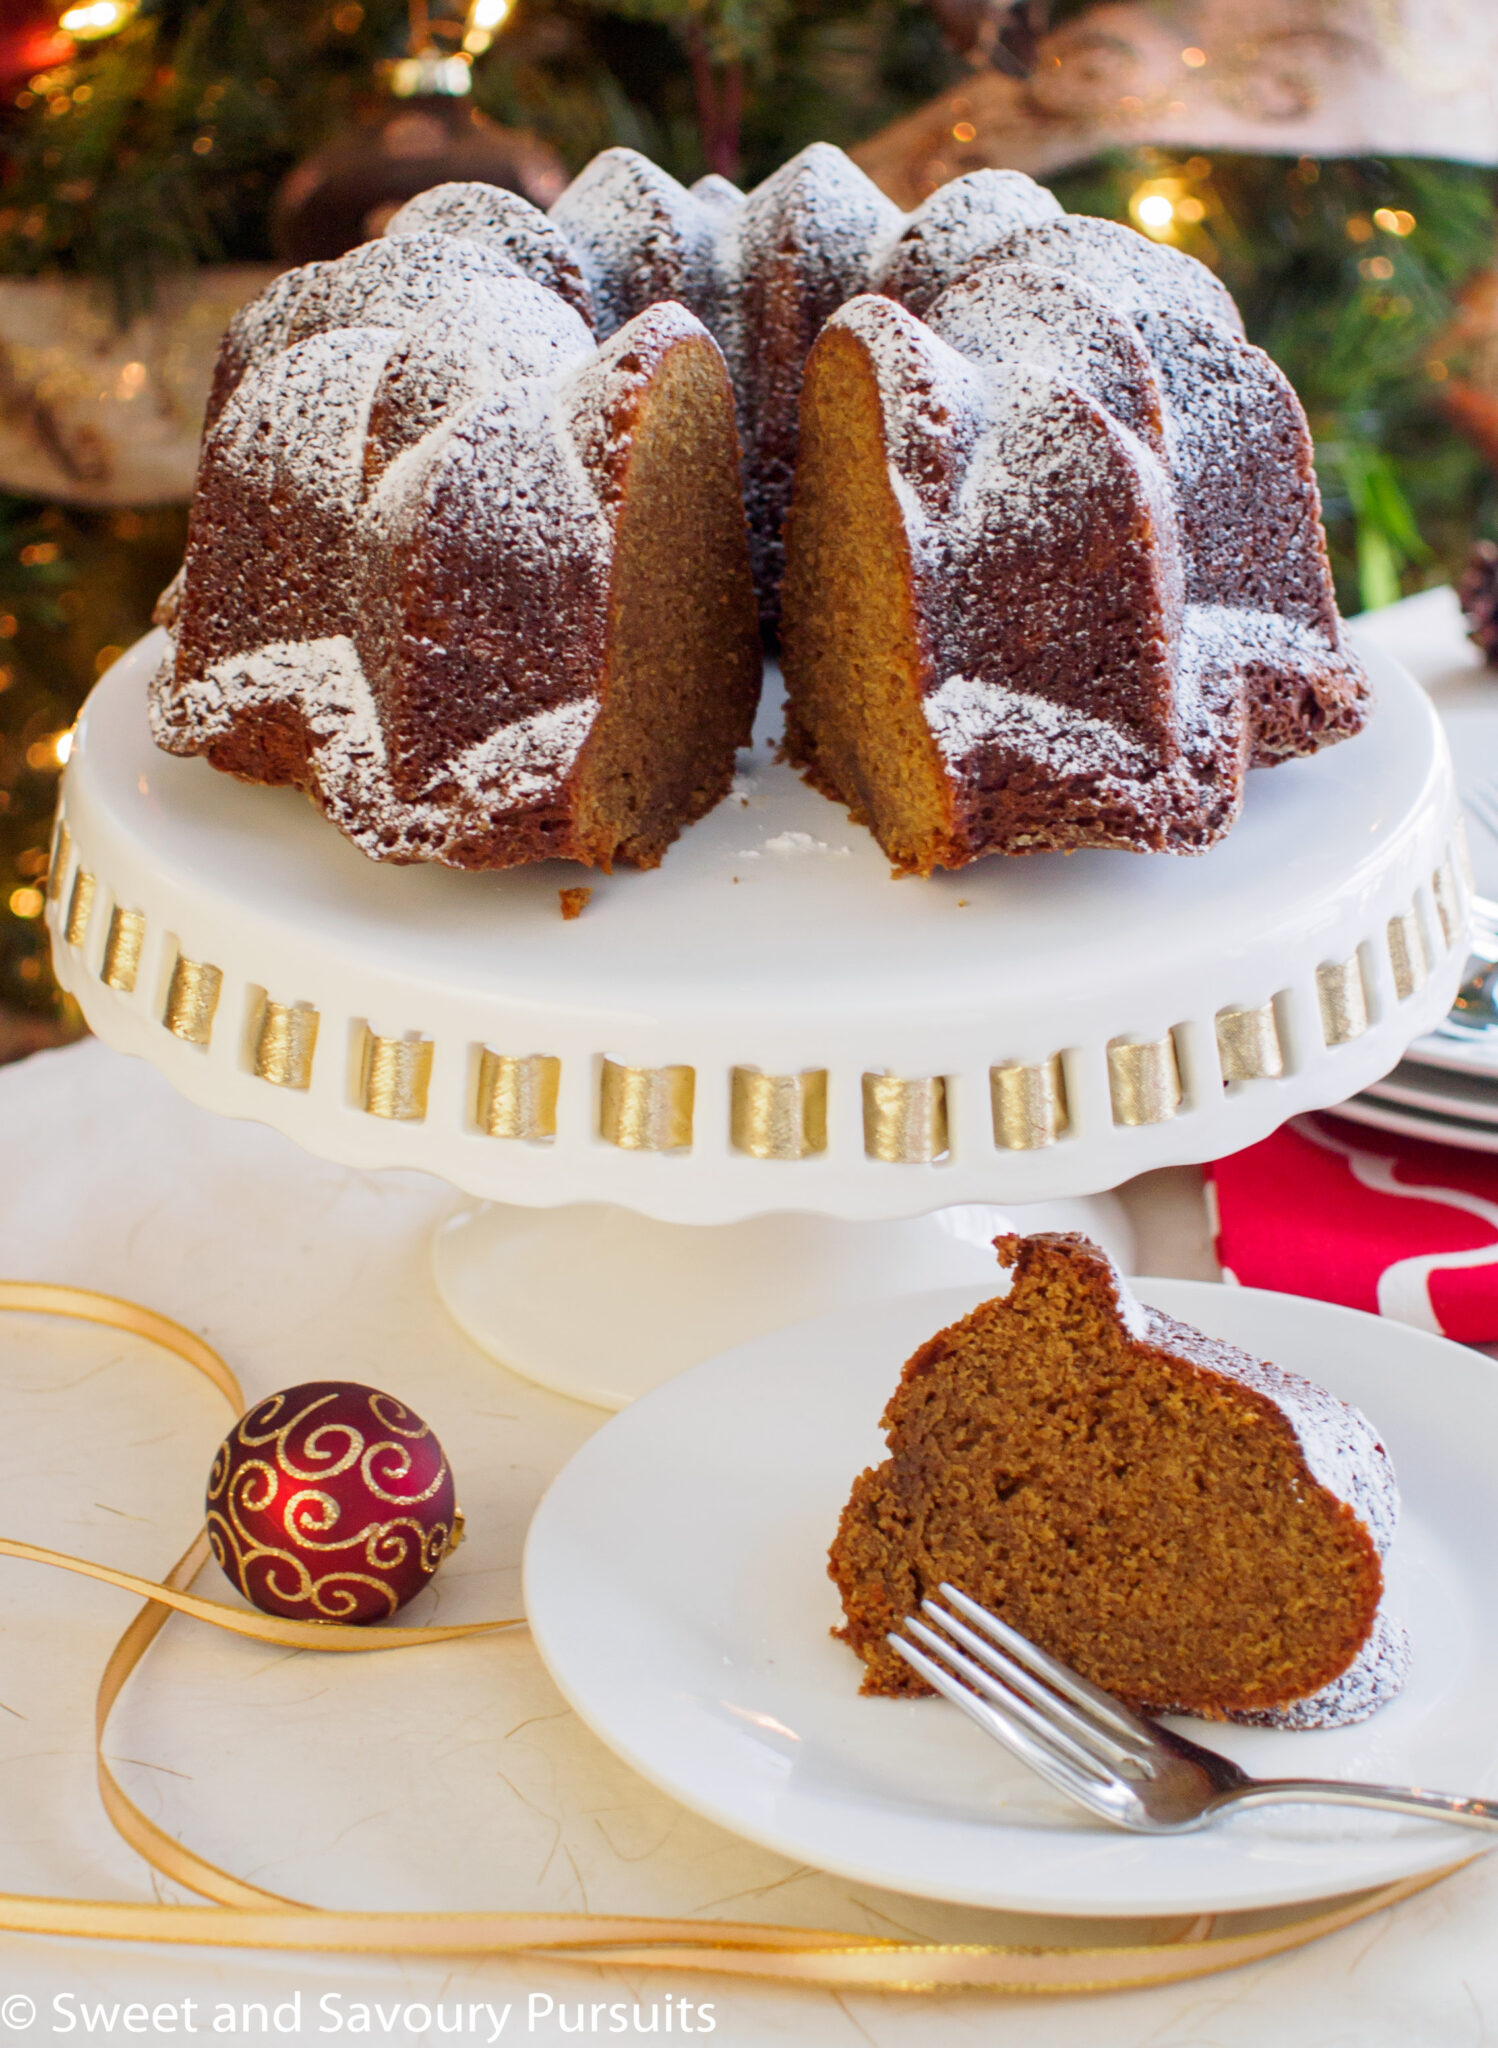 Gingerbread bundt cake with slice cut out and served on dish.